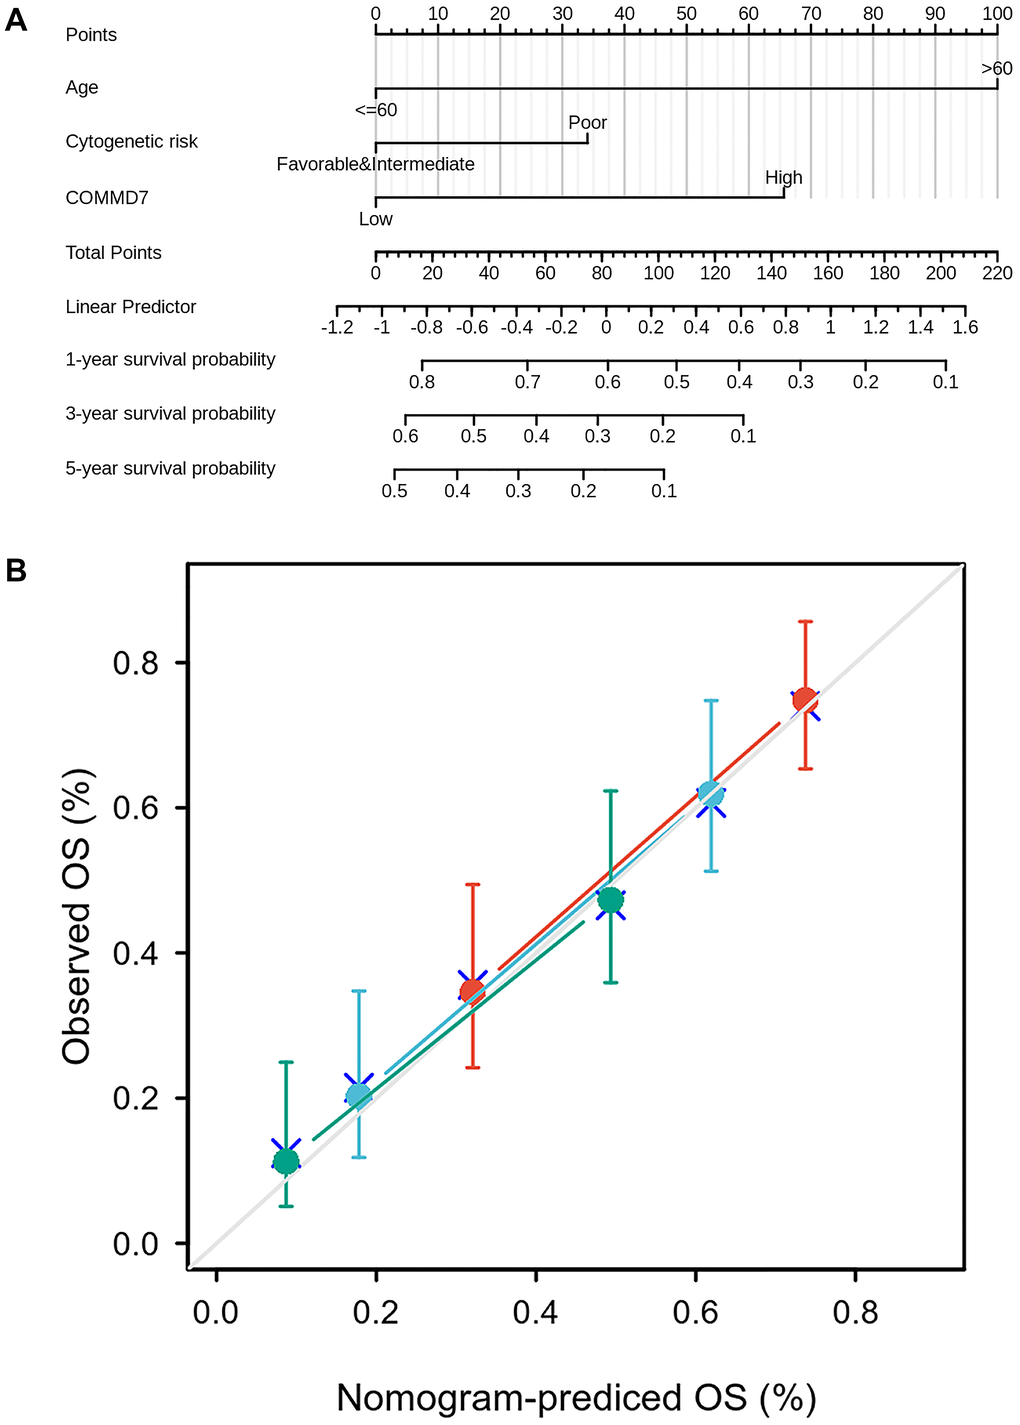 A prognostic predictive model of COMMD7 in AML. (A) Nomogram for predicting the probability of 1-, 3-, 5-year OS for AML. (B) Calibration plot of the nomogram for predicting the probability of OS at 1, 3, and 5 years.